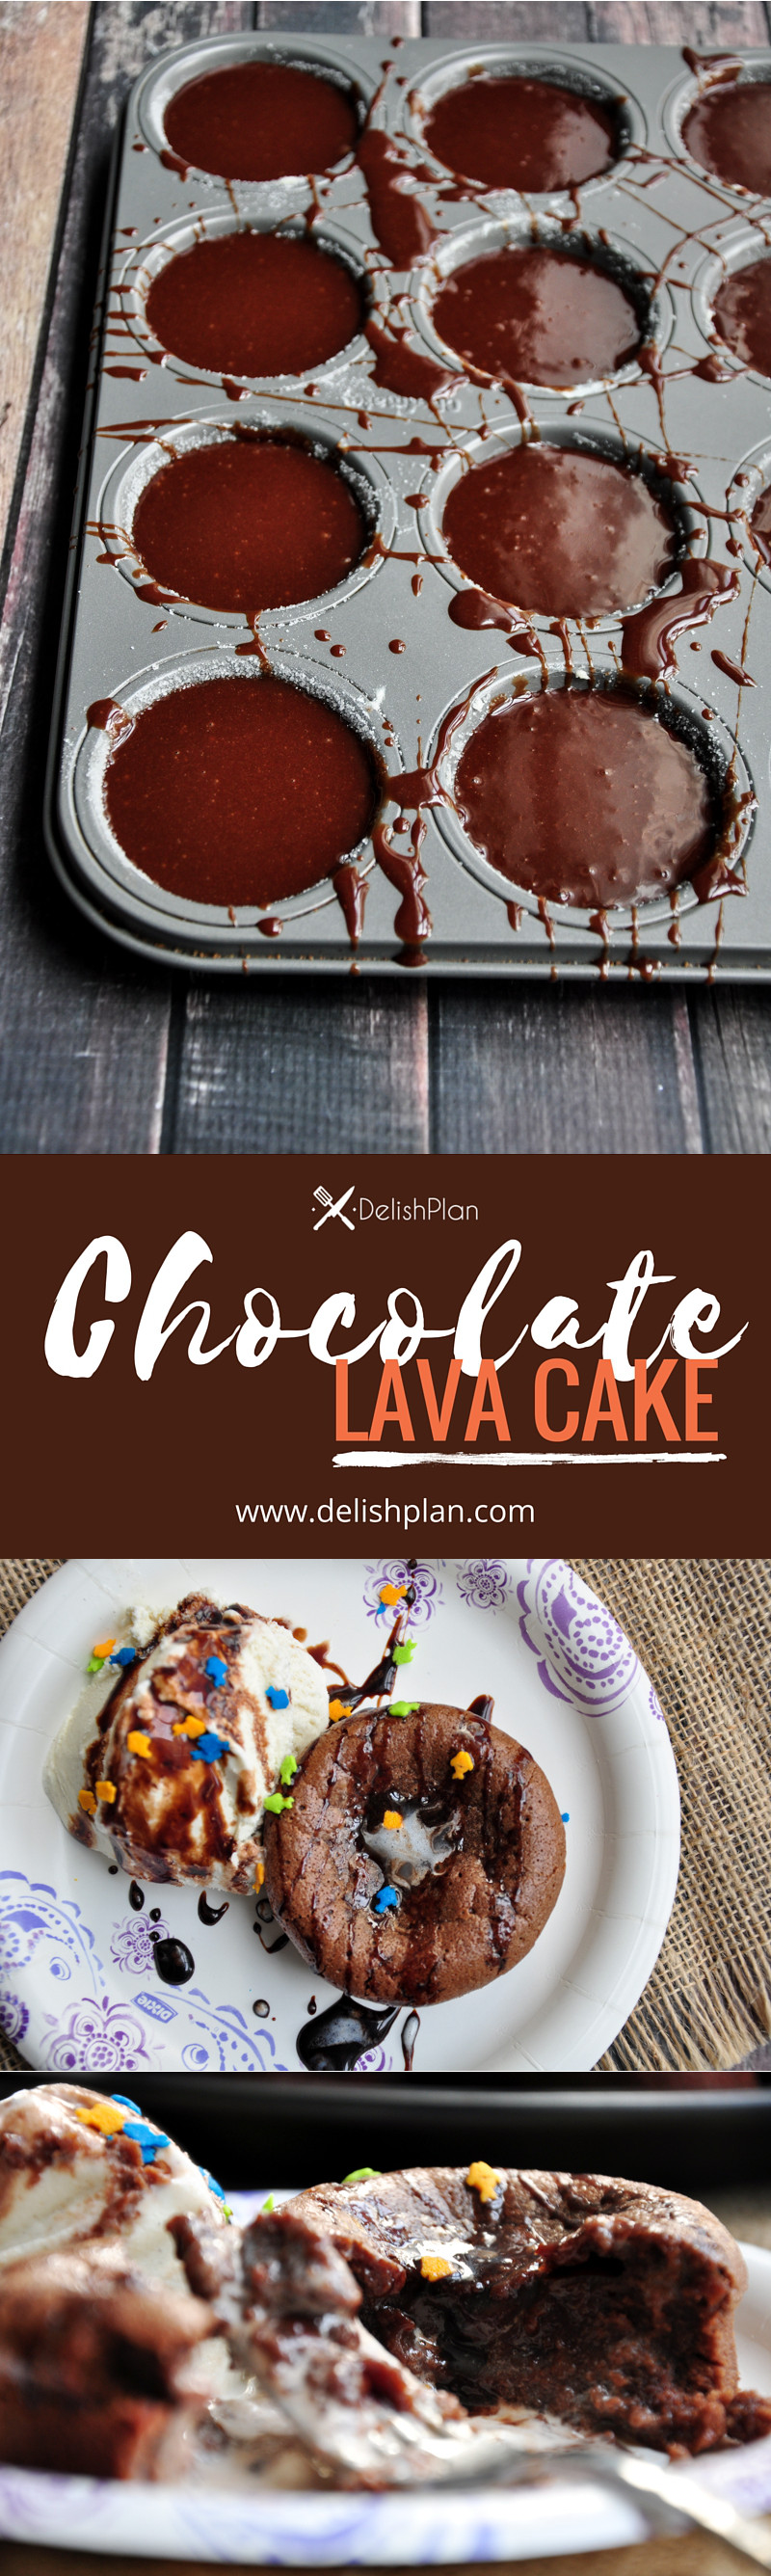 Gooey inside and firm outside, this chocolate lava cake only requires 5 ingredients and 30 minutes. It's incredibly good!